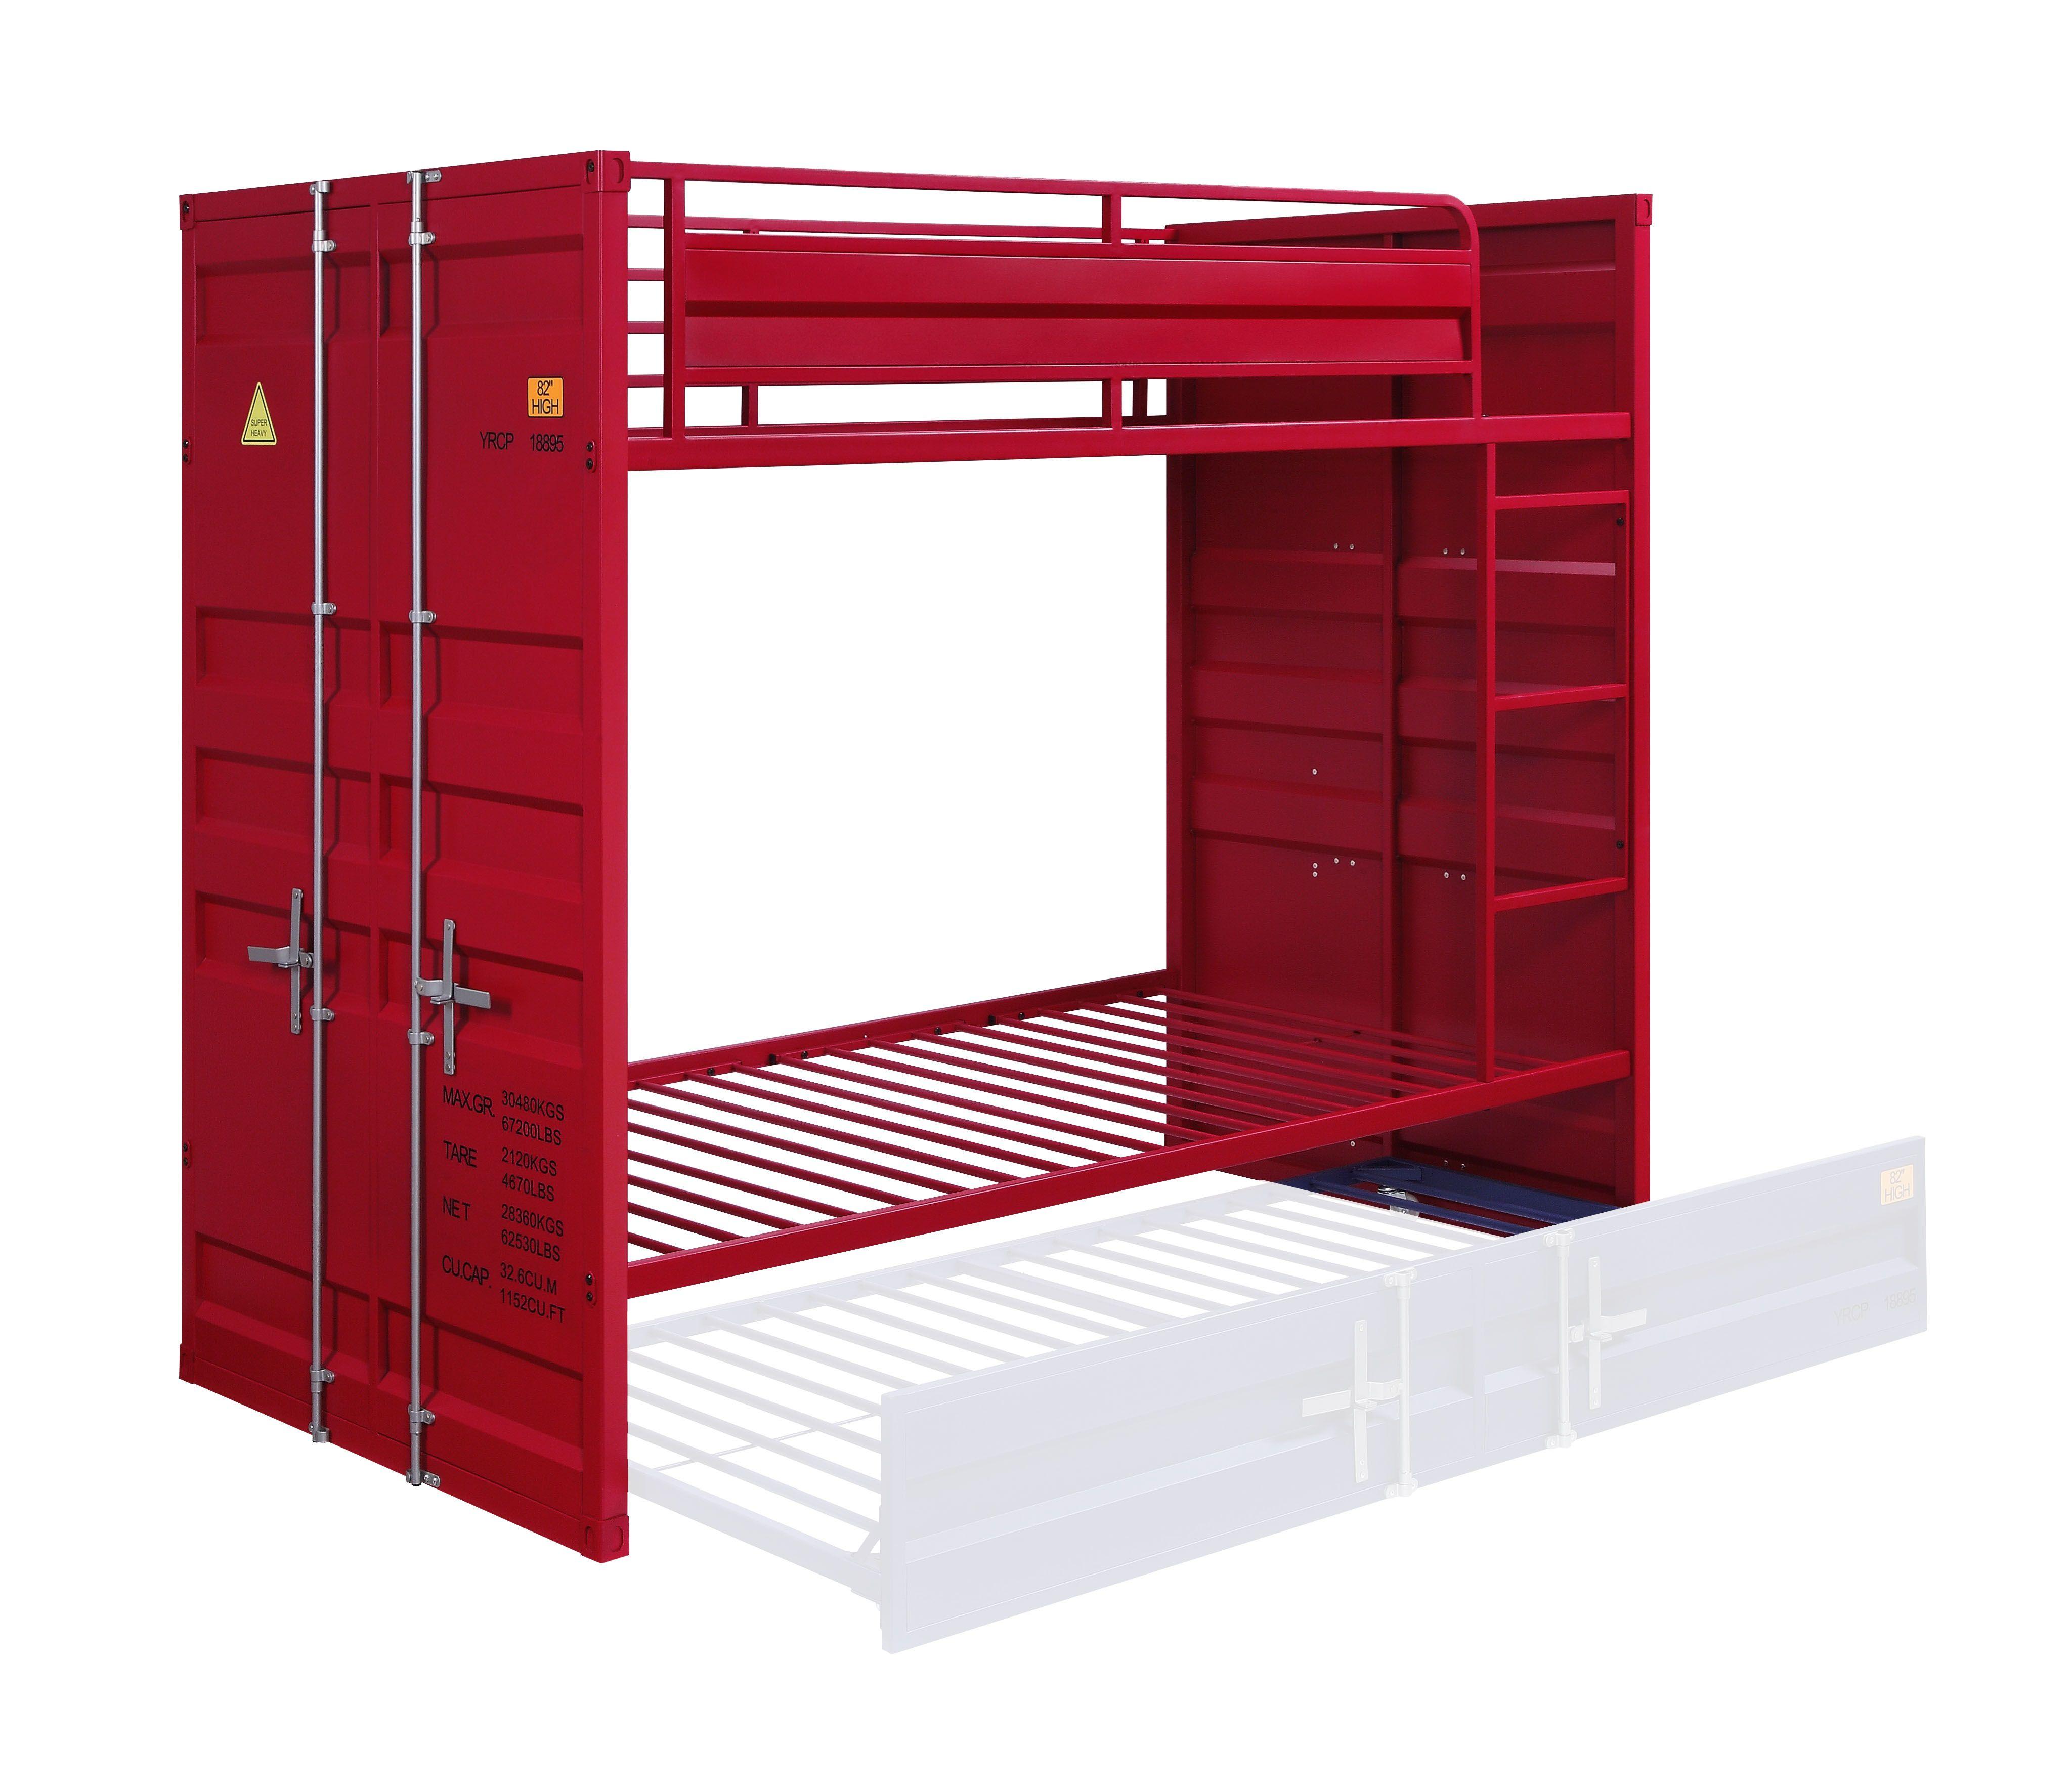 

    
Contemporary Red Twin Bunk Bed by Acme Cargo 37910
